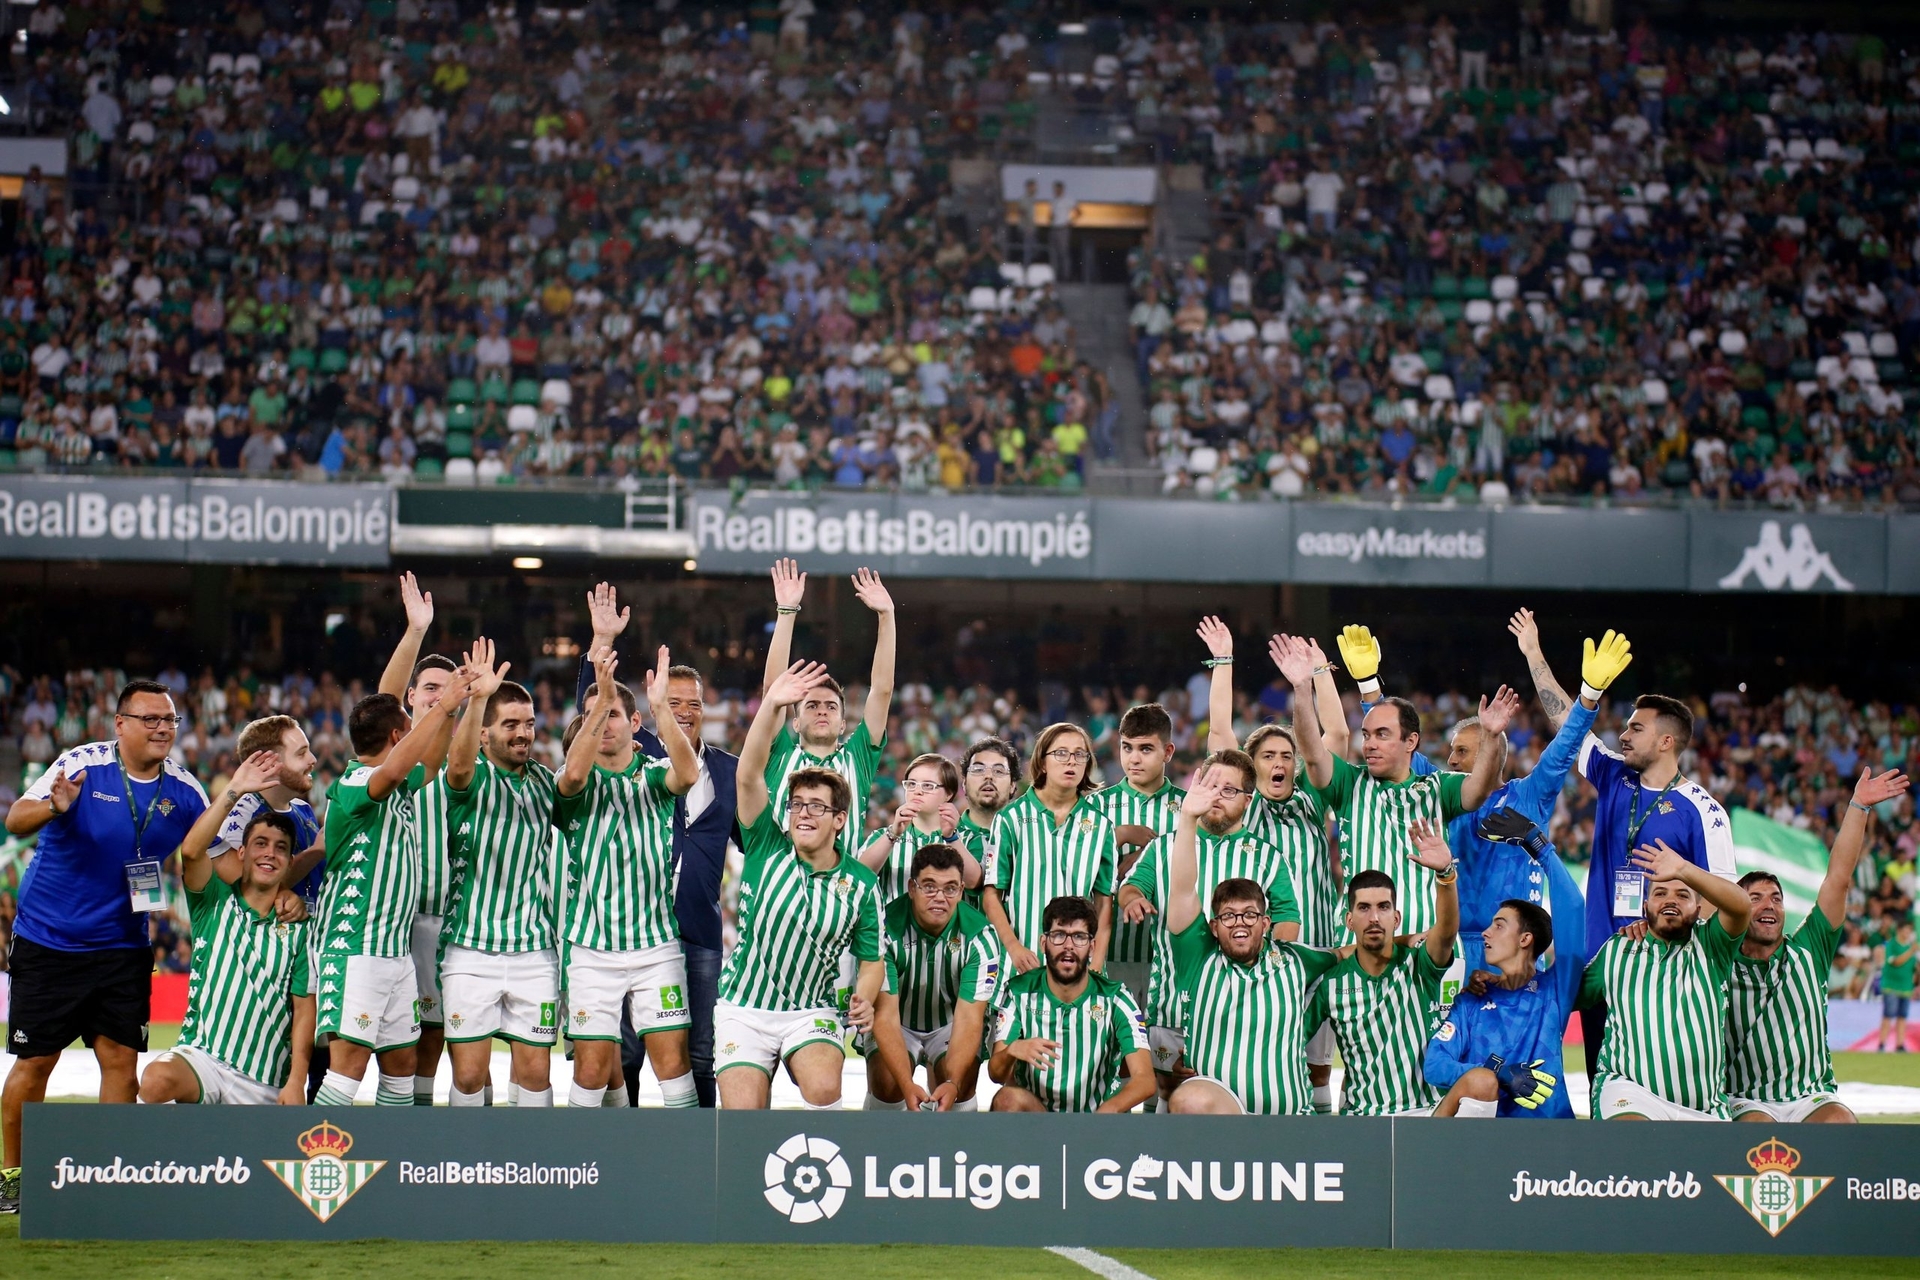 Real Betis Balompie Launching Innovative Sustainability Project